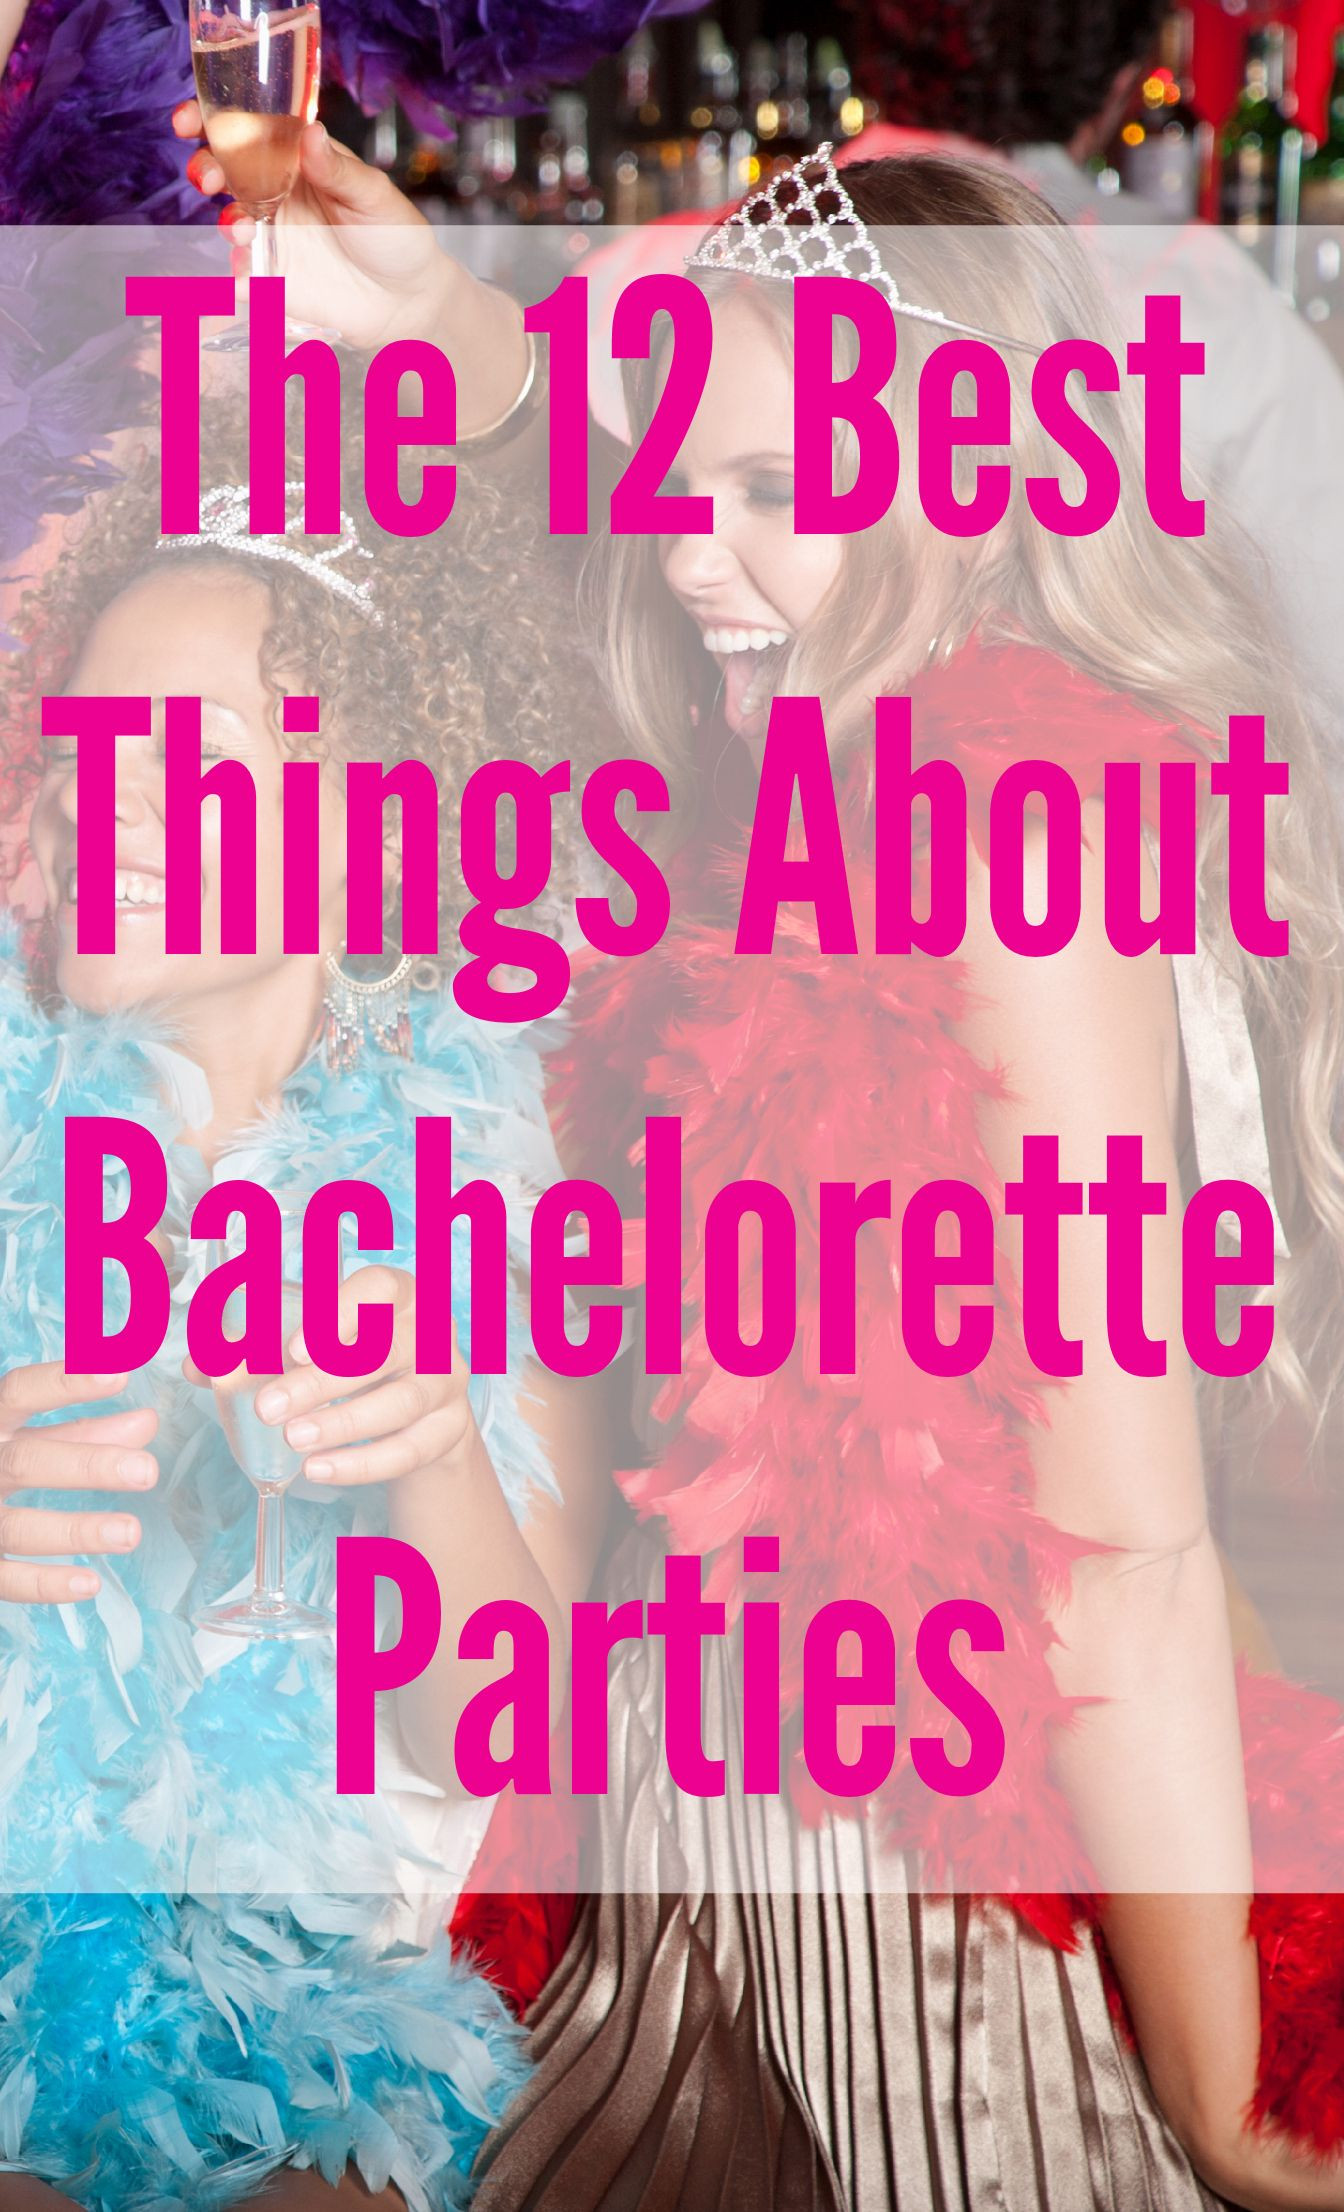 Slumber Party Bachelorette Party Ideas
 The 12 Best Things About Bachelorette Parties